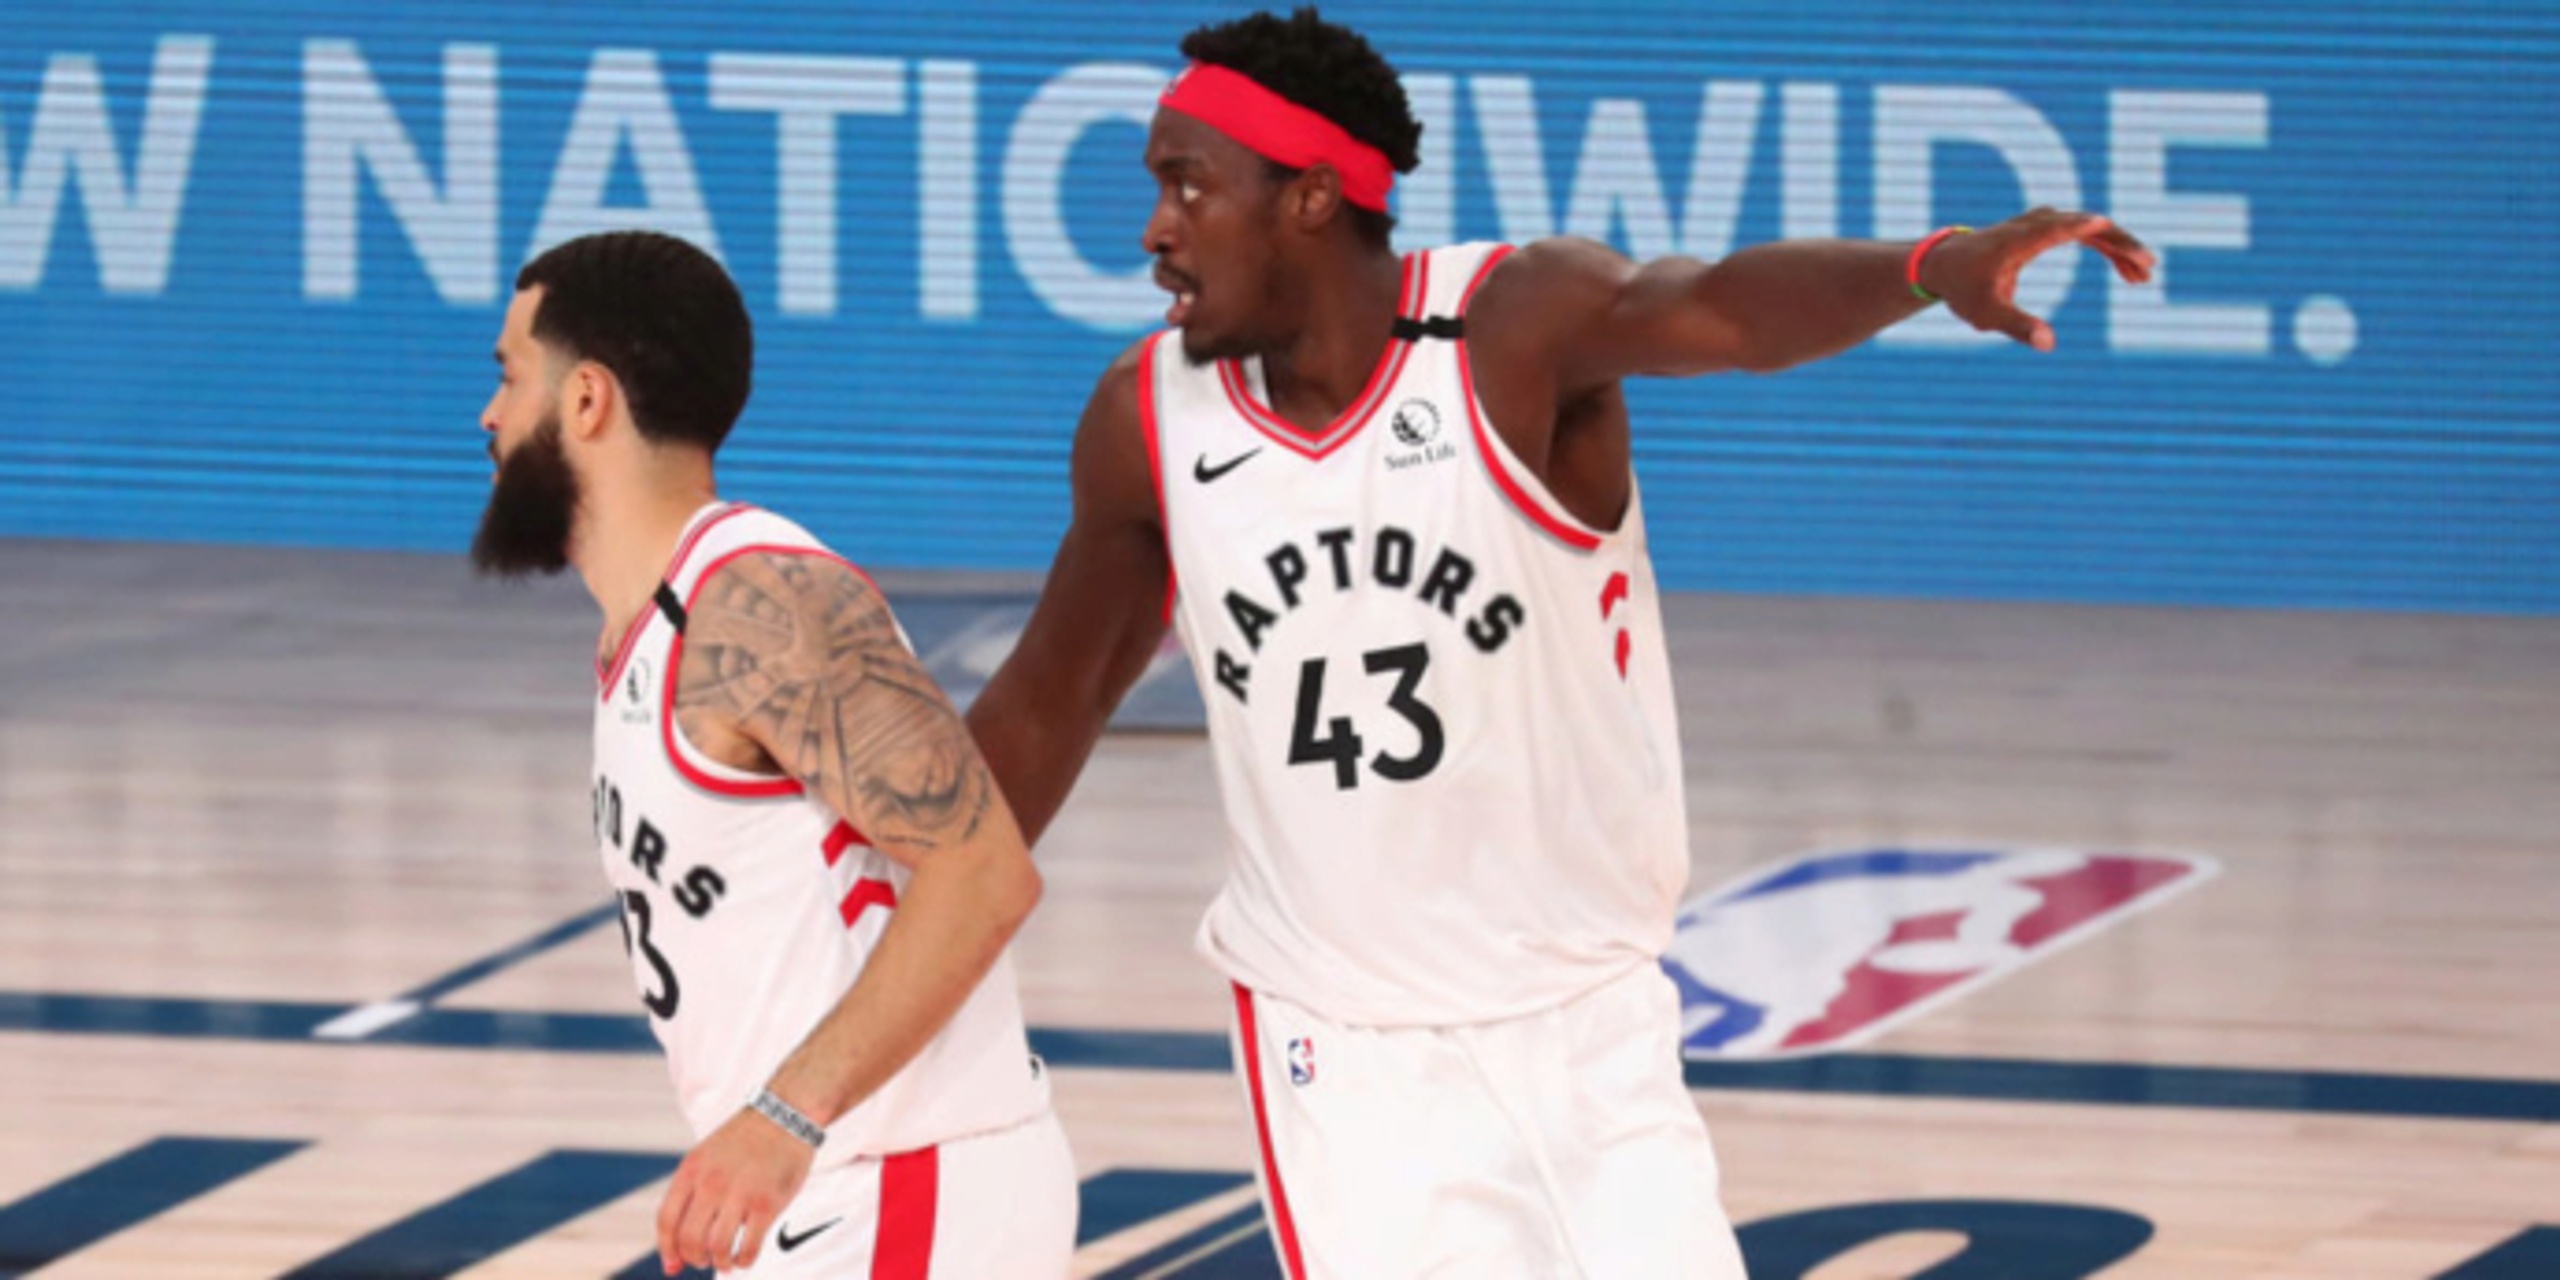 Hoping for home: Raptors thank Tampa, but clamor for Toronto